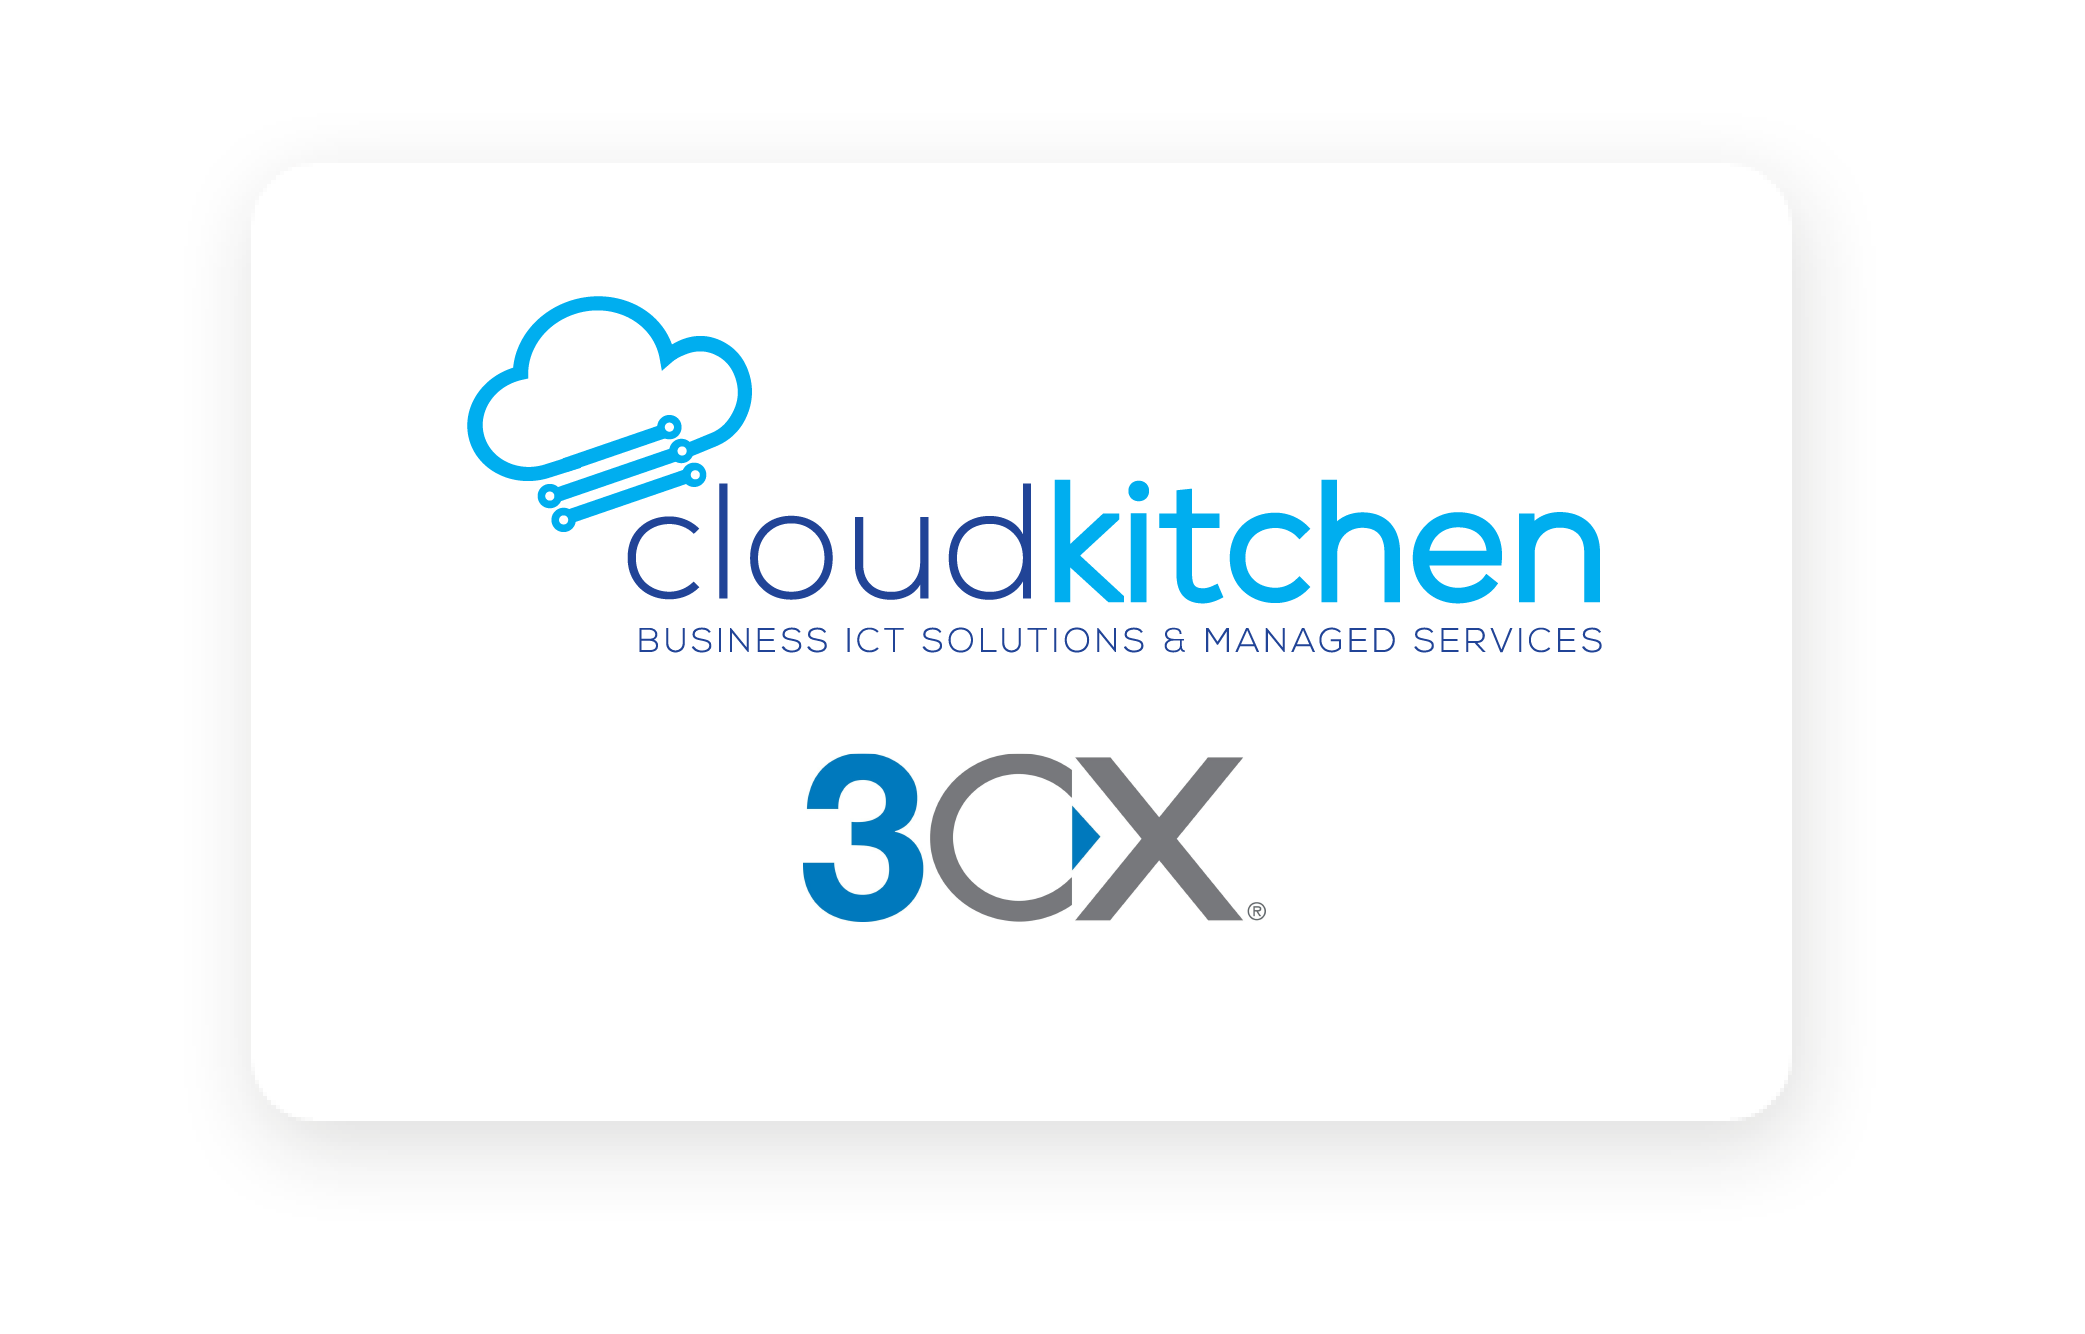 Cloud Kitchen partnered with 3CX